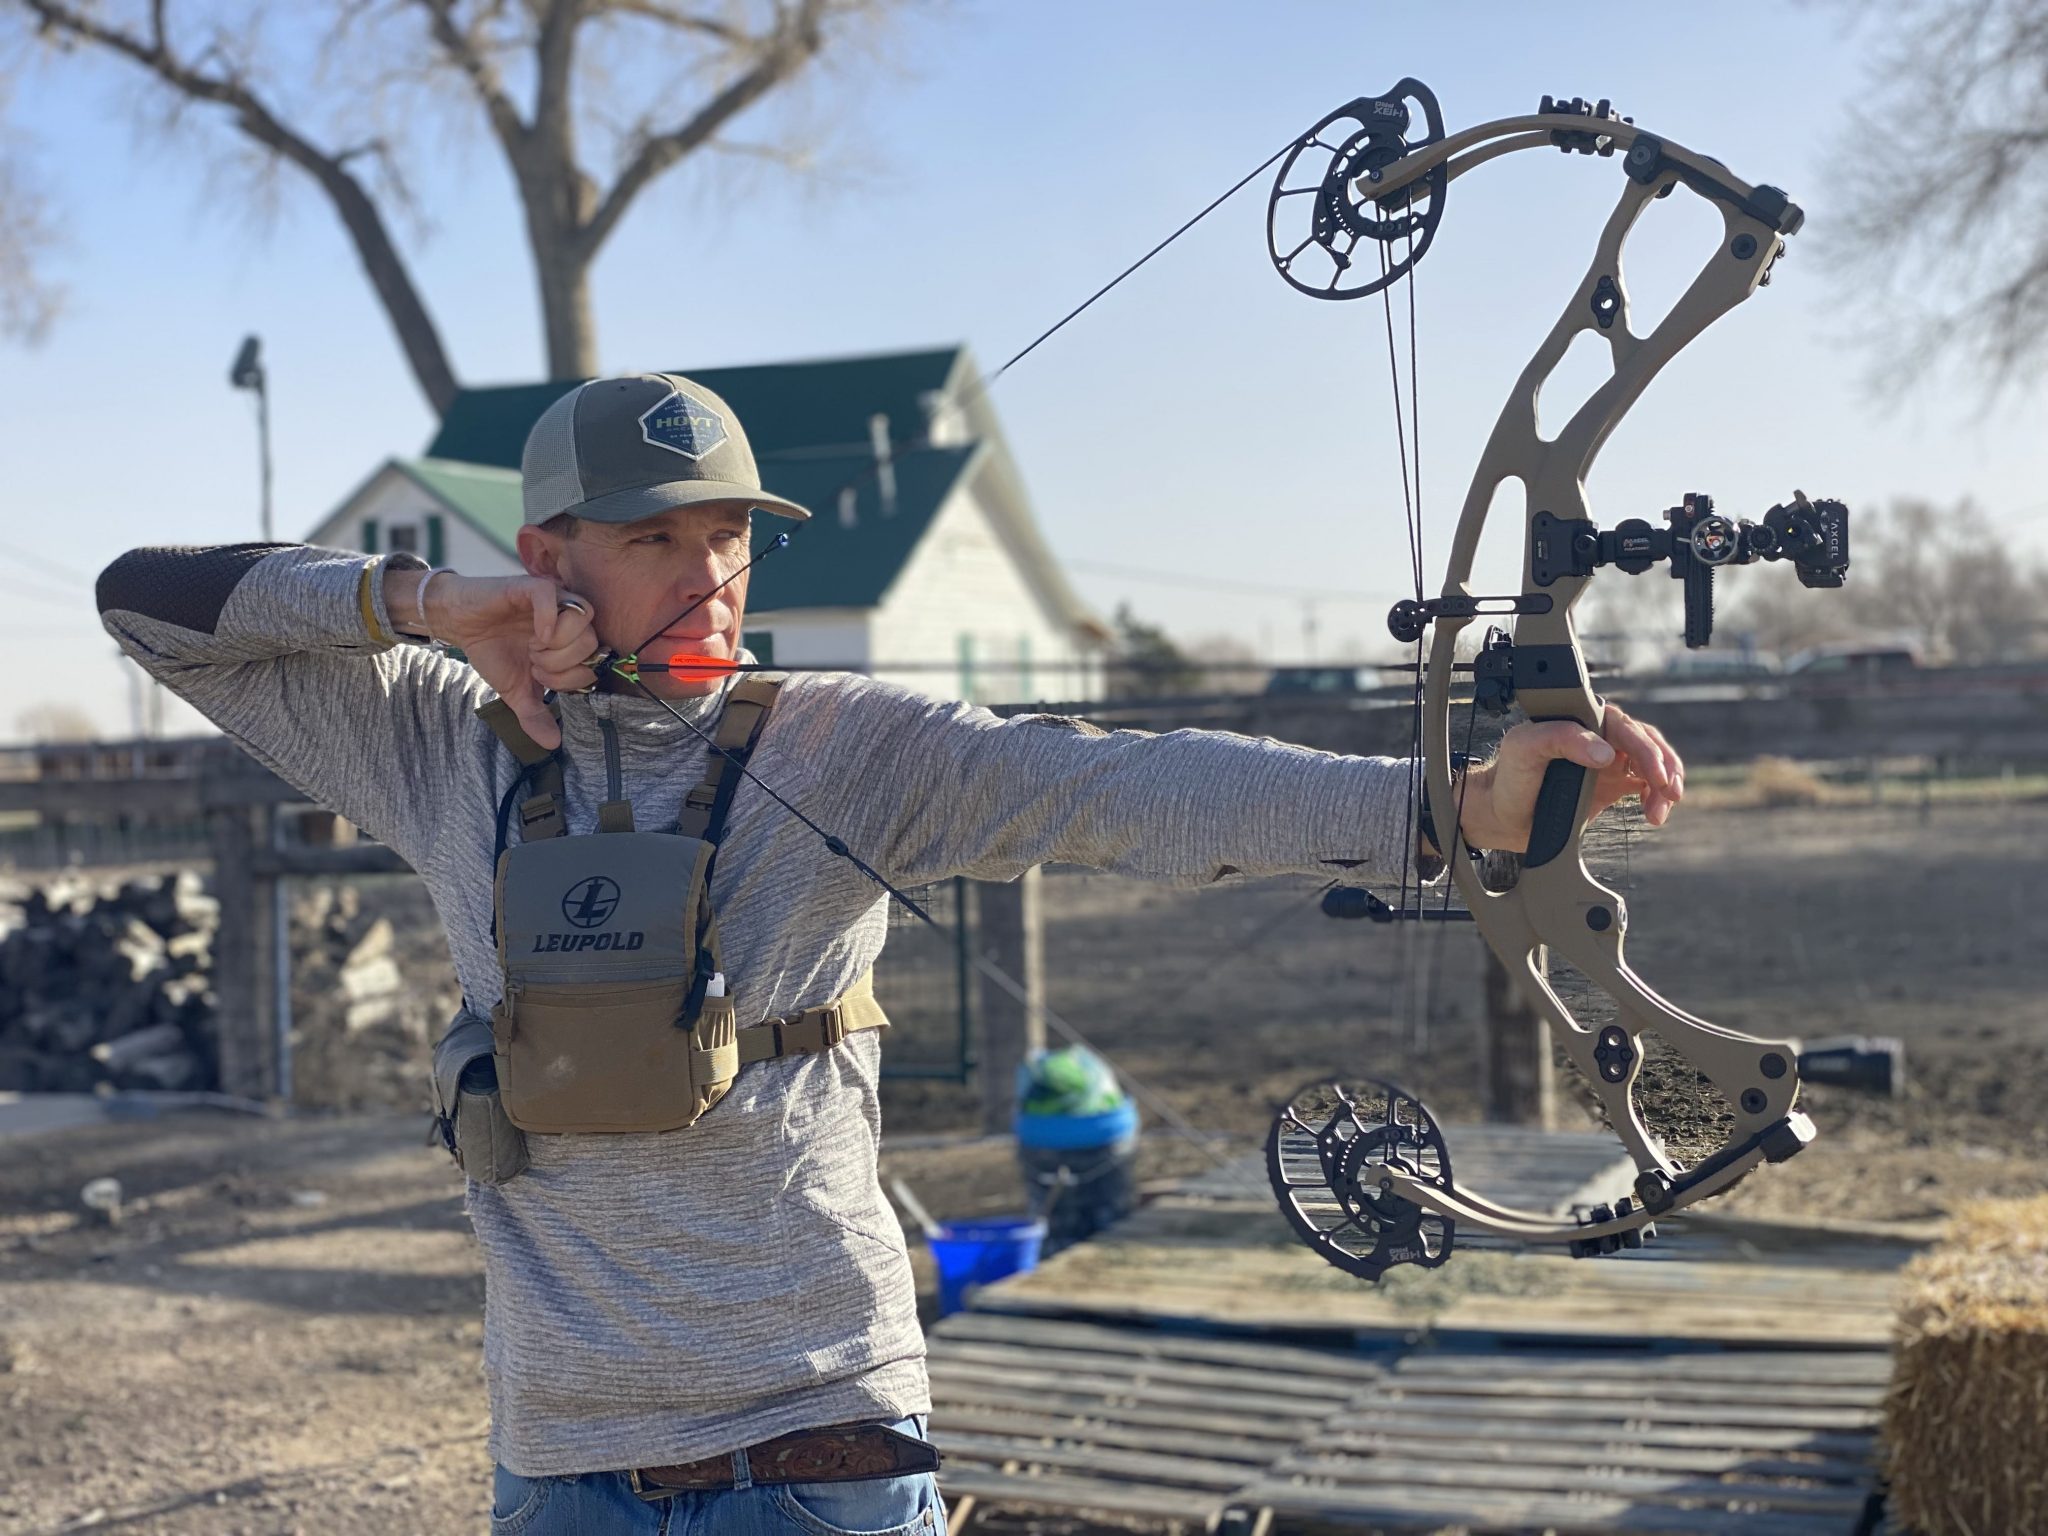 Hoyt’s Carbon RX-7 – Tested!